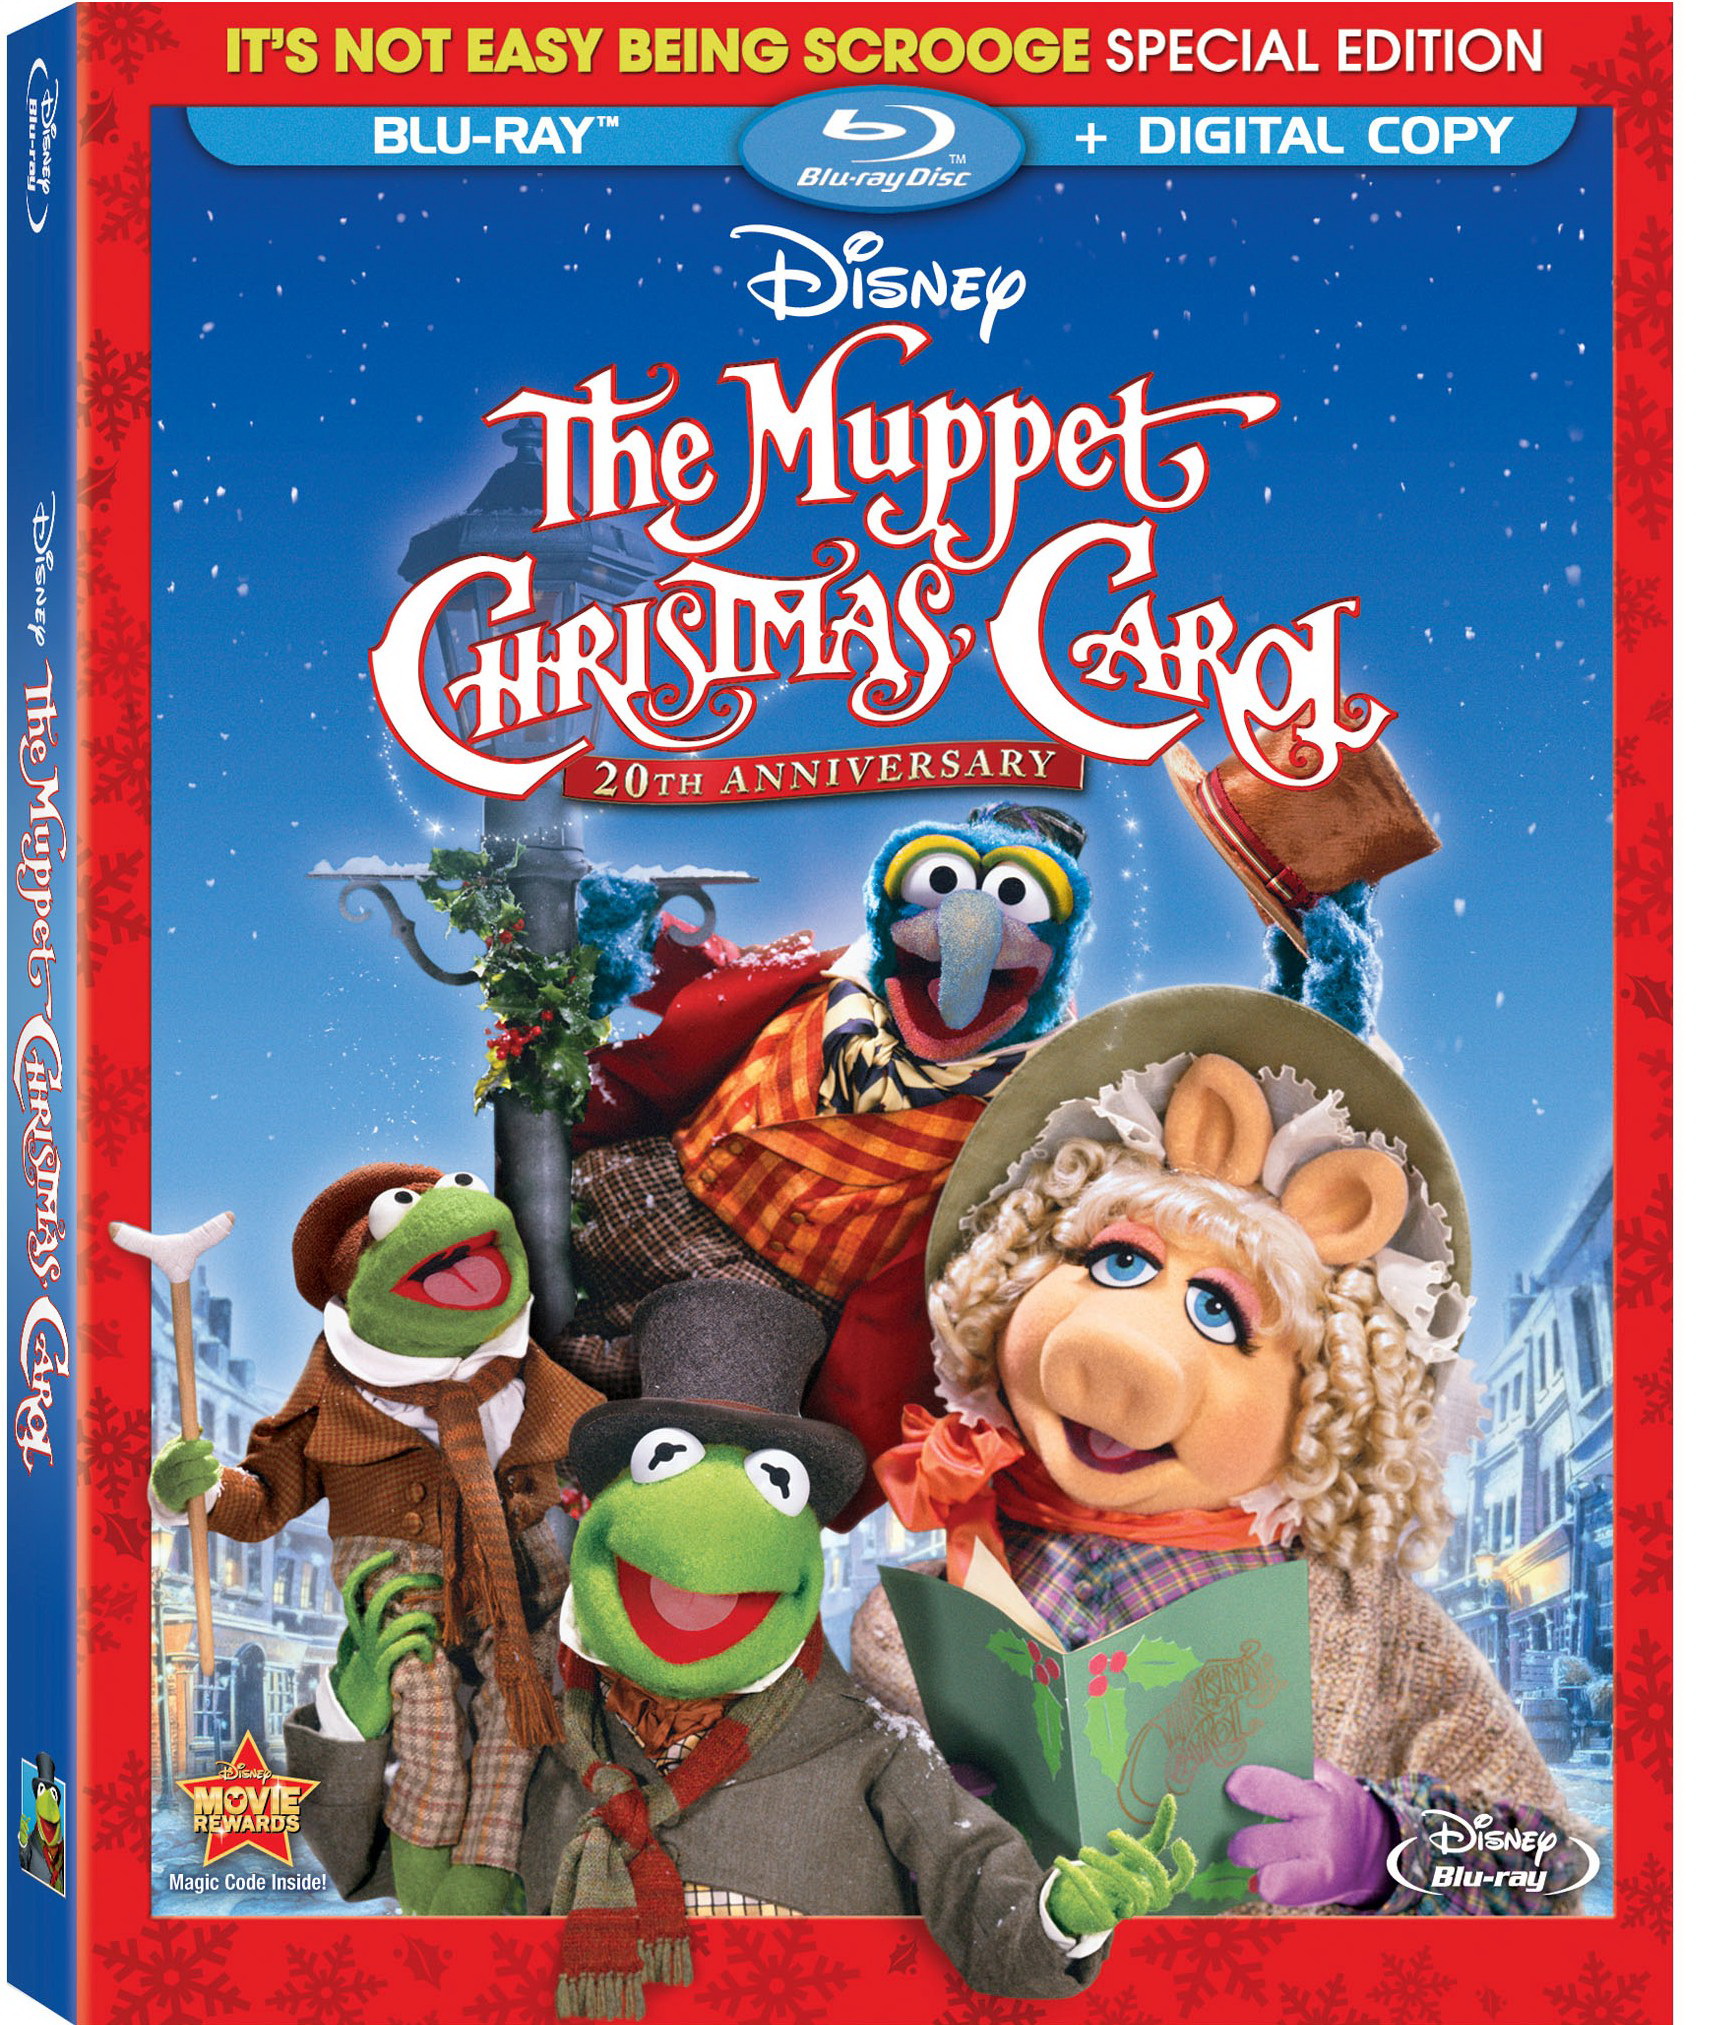 The Muppet Christmas Carol Blu-ray Review